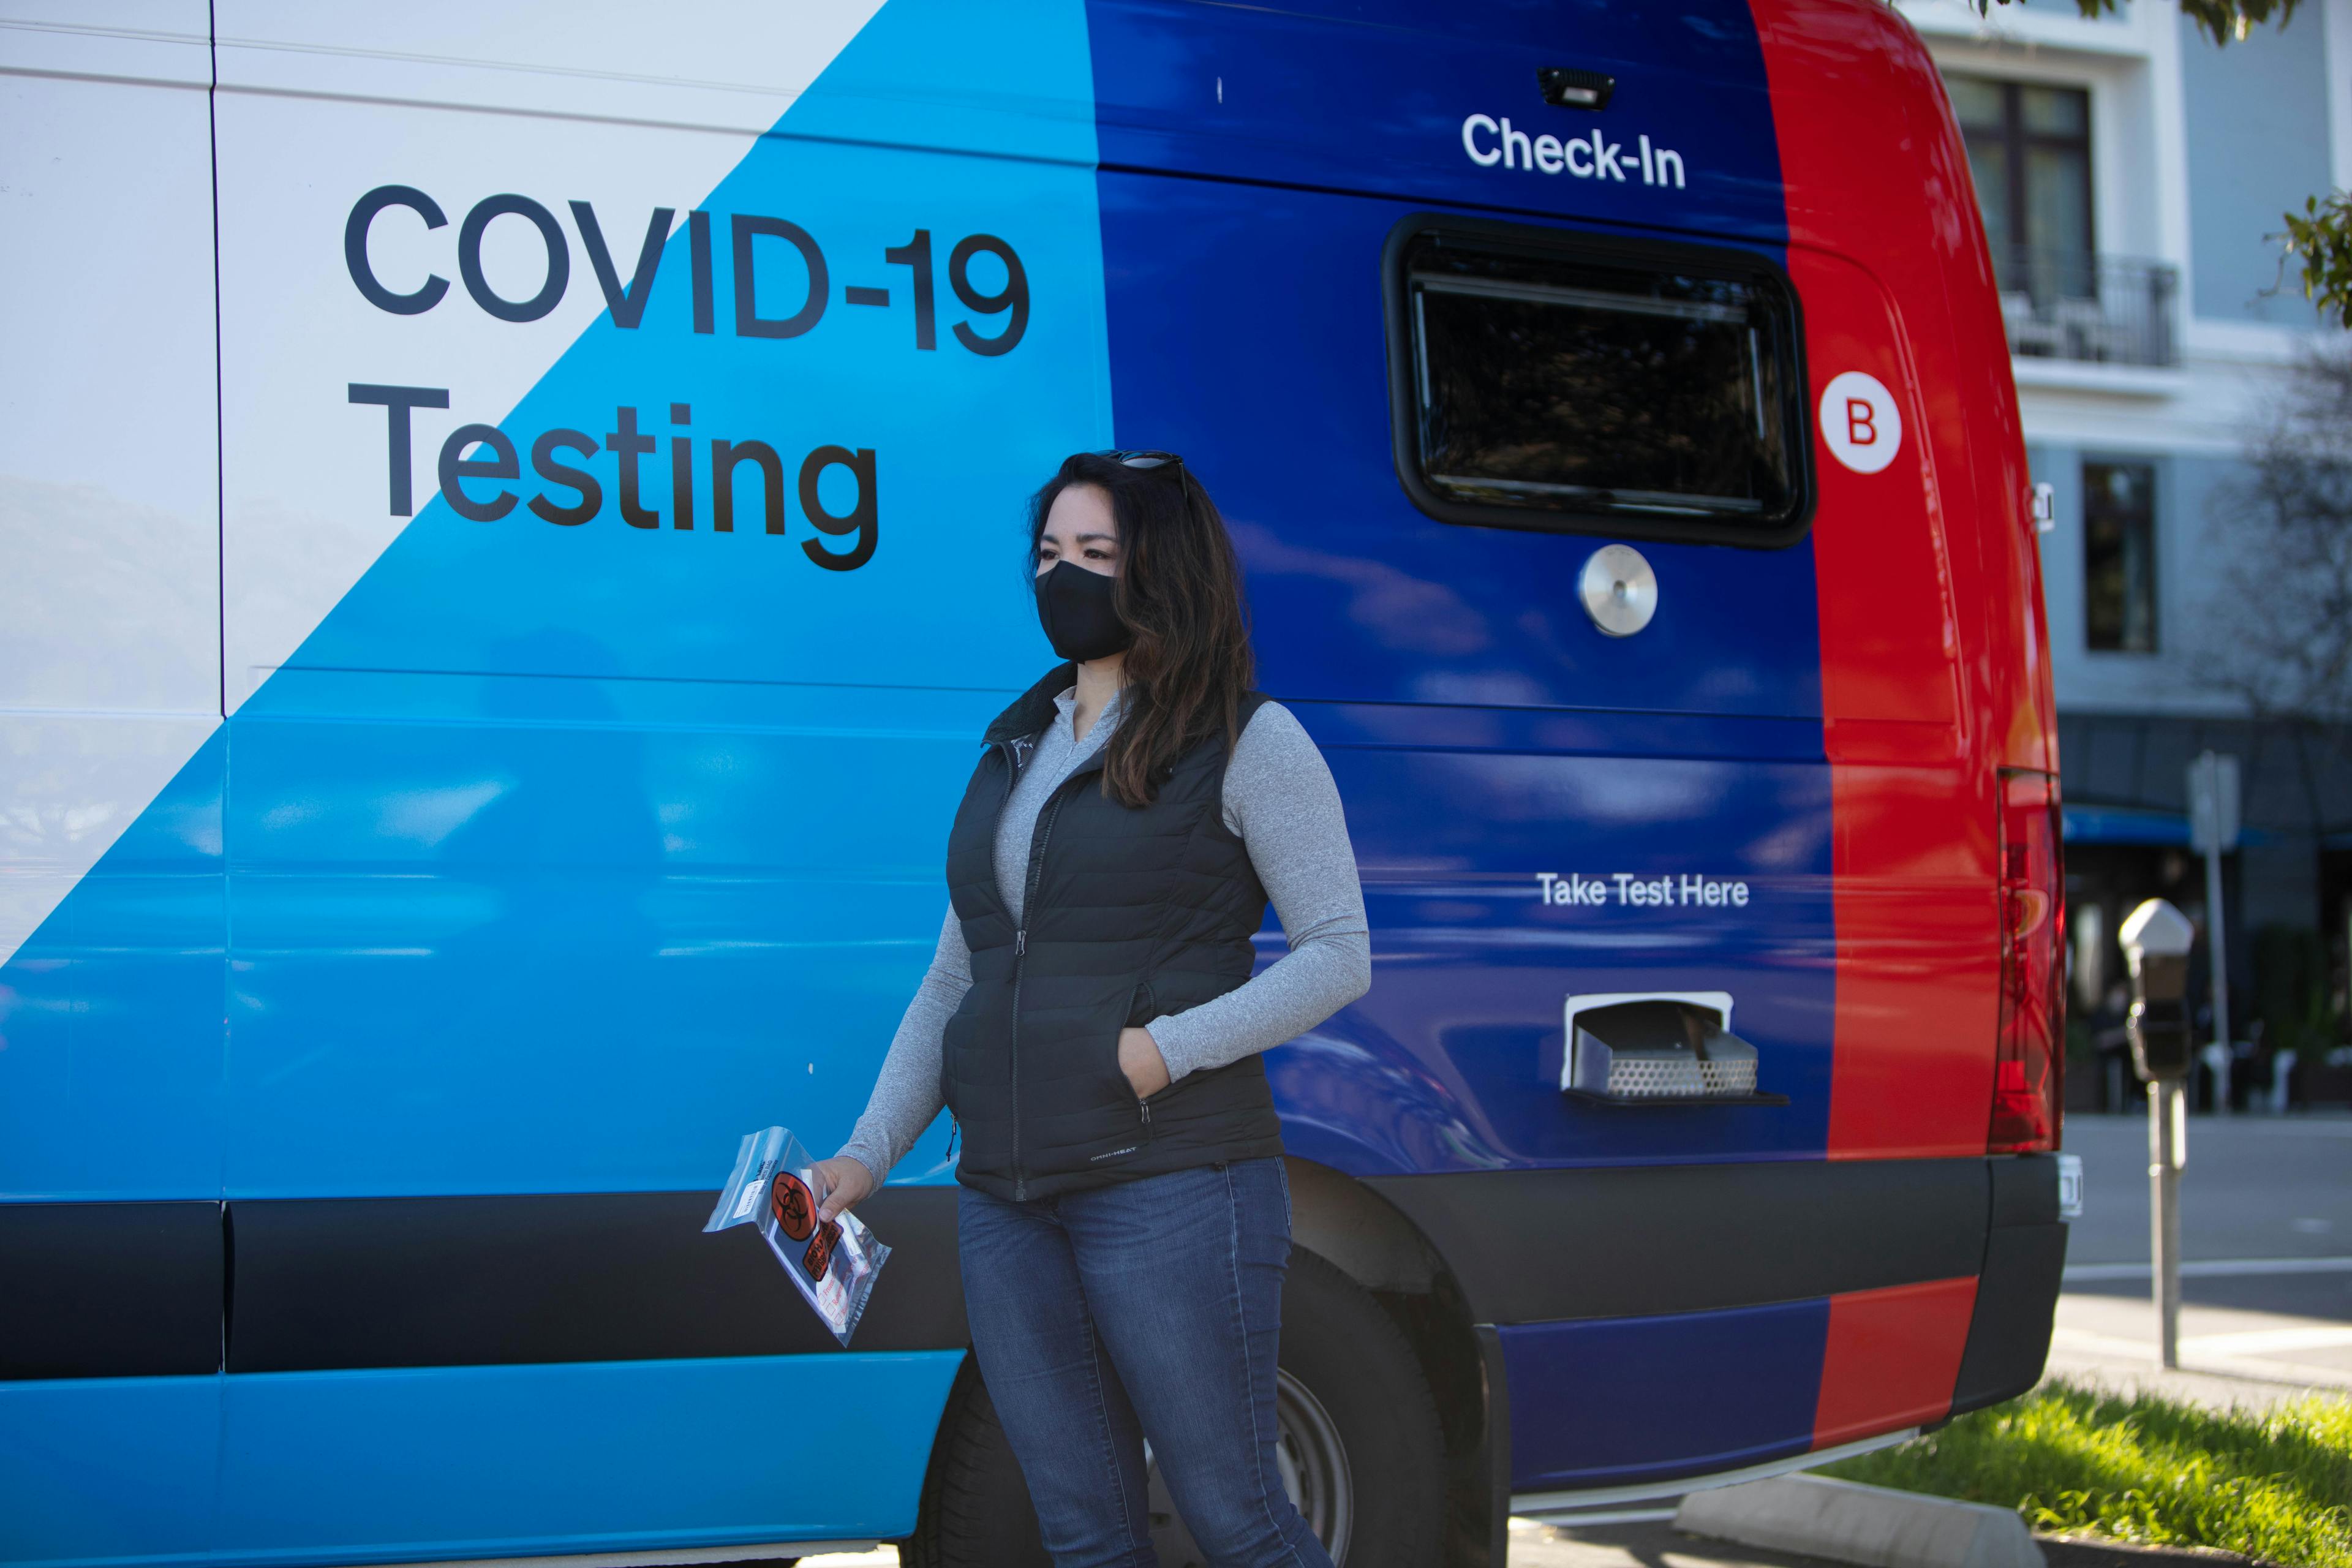 Why Are There Different Kinds of COVID-19 Testing?